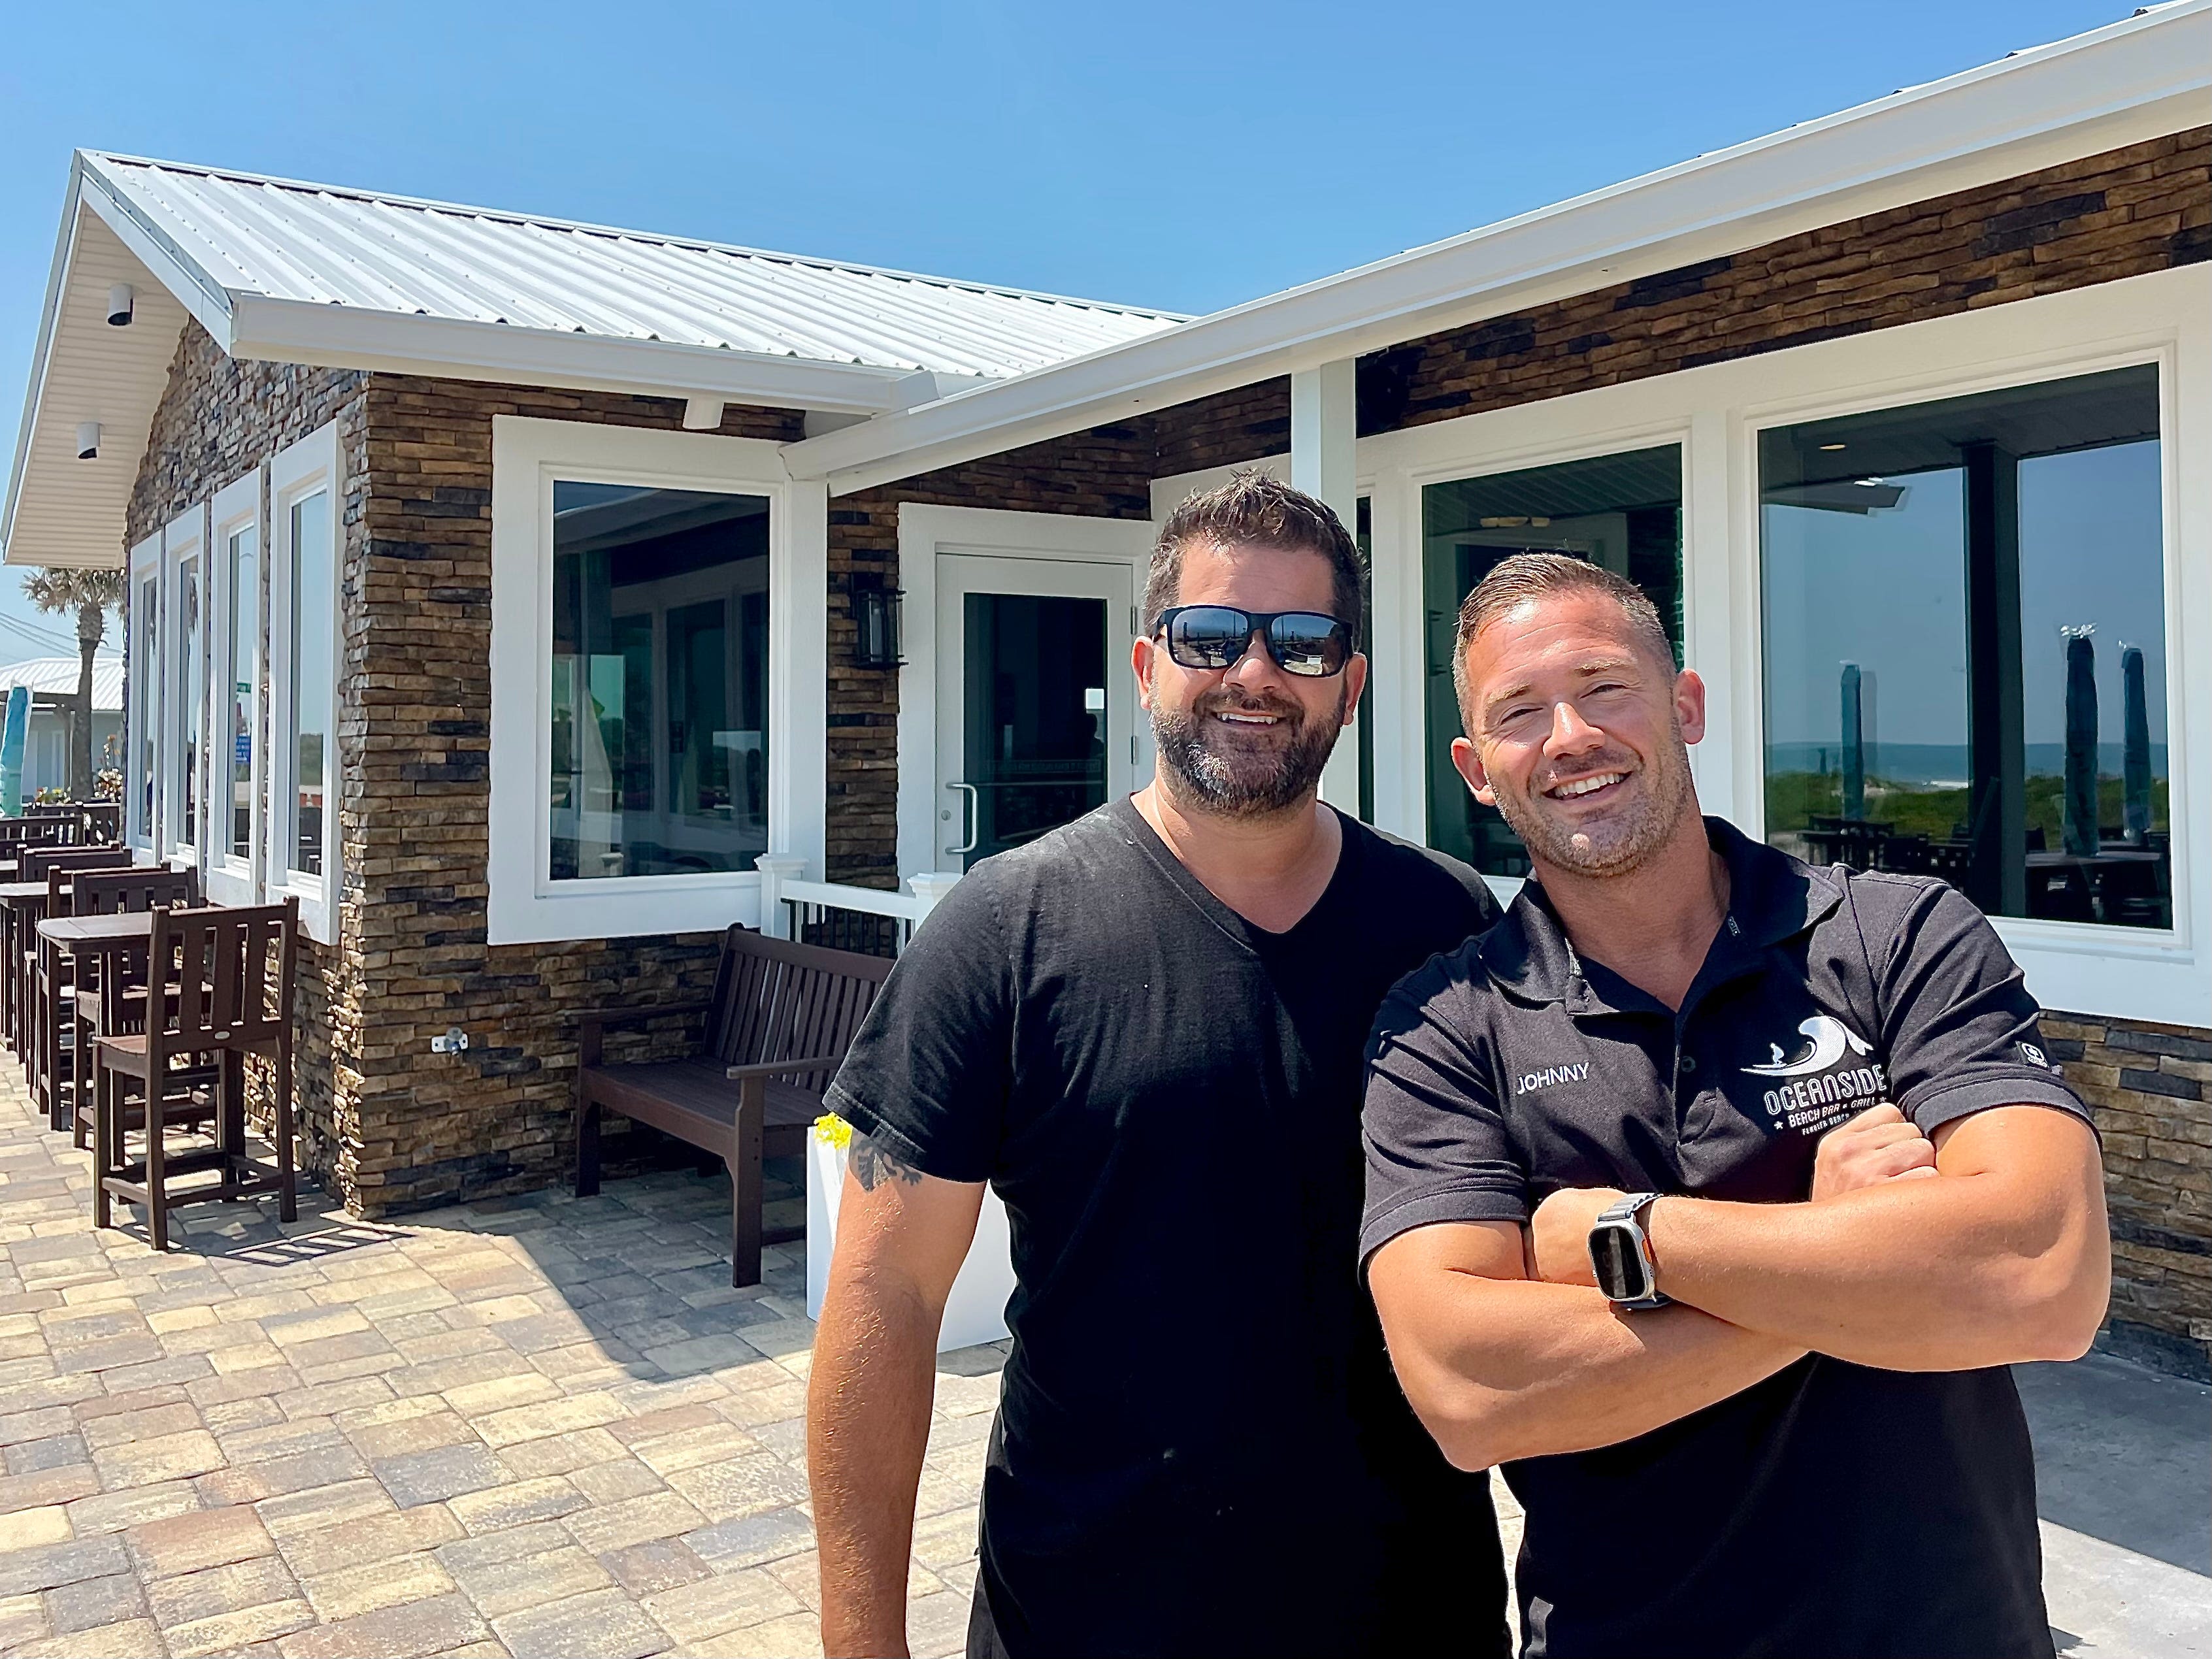 Restaurant news: Family-owned Flagler beach bar and grill opens in Ormond-by-the-Sea